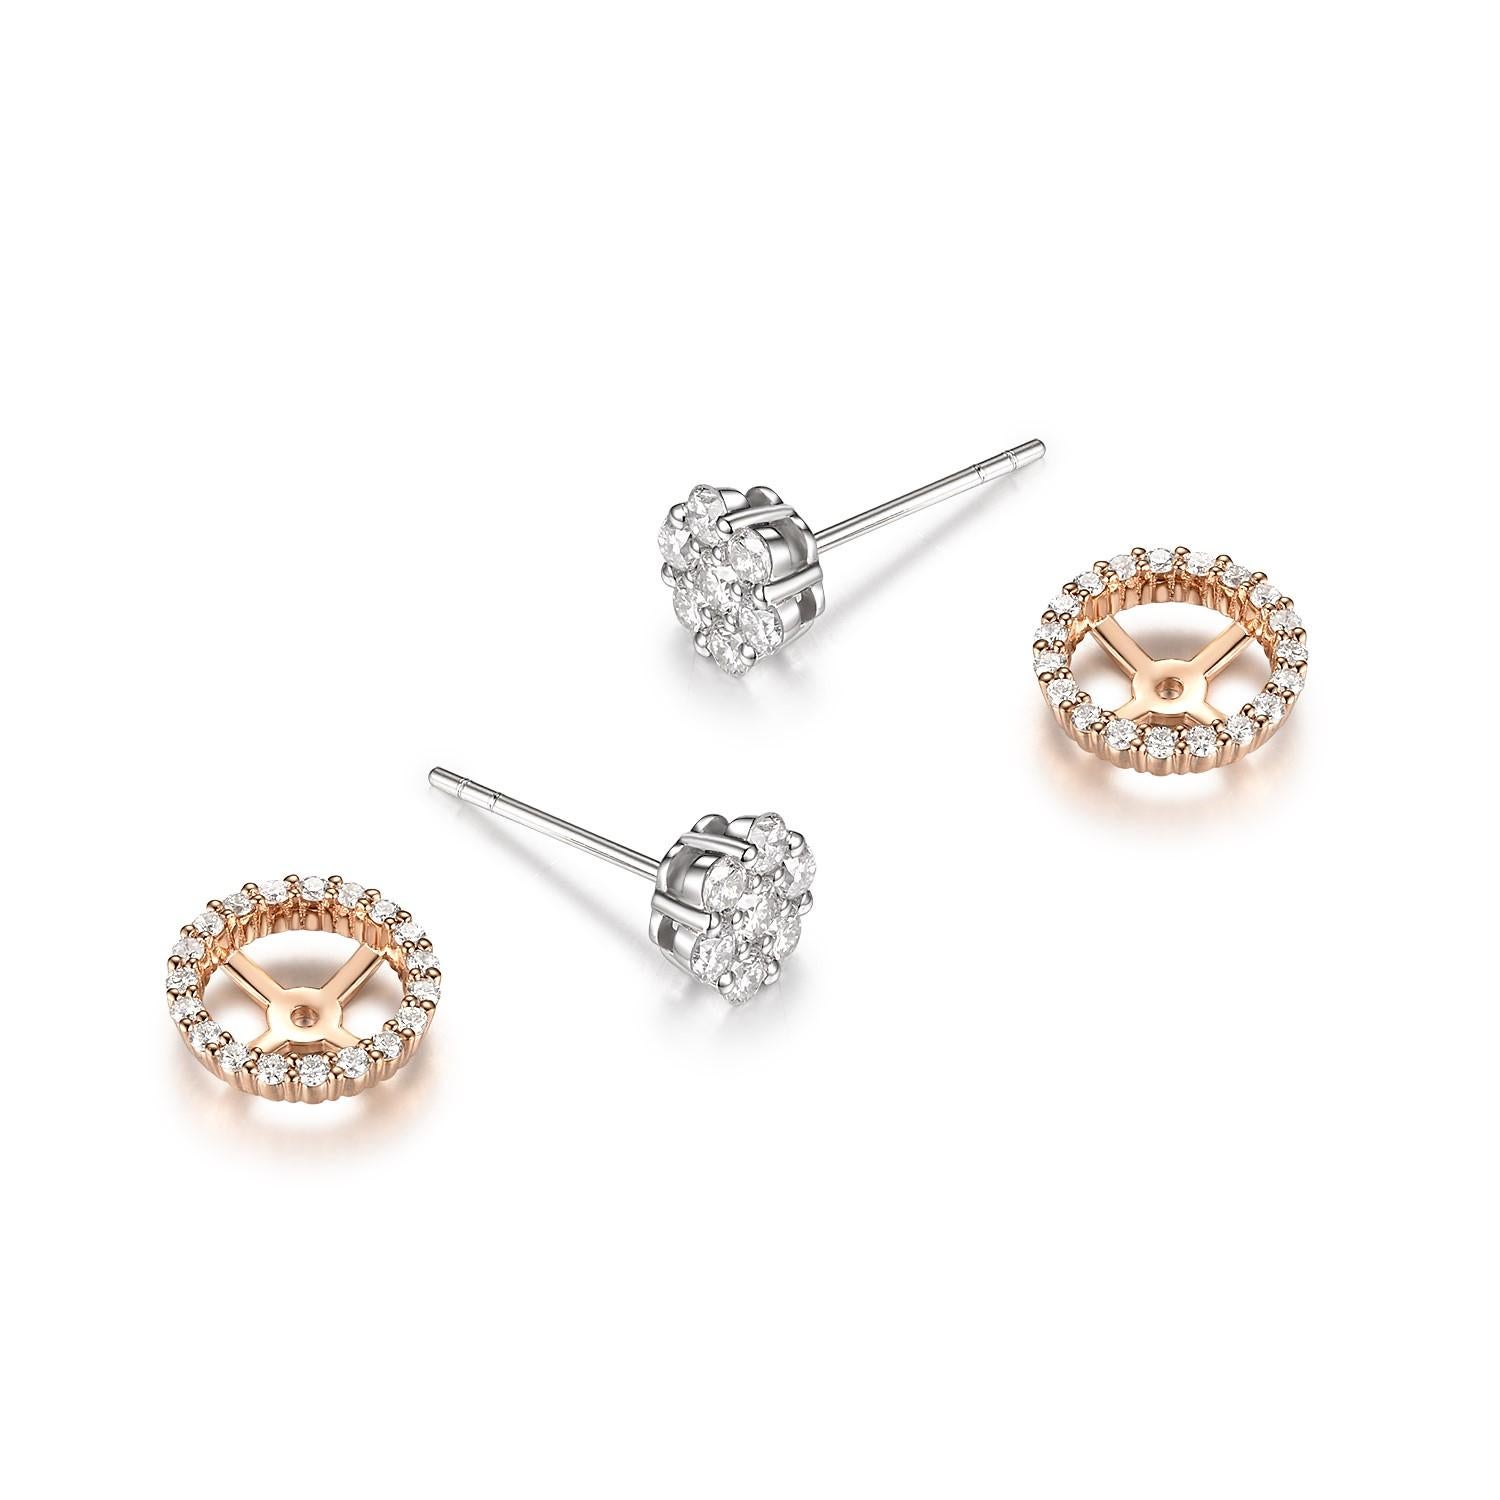 These Diamond Cluster Earrings with a Diamond Halo Jacket are an exquisite pair of earrings crafted in 18 karat rose and white gold. They feature a total of 0.83 carats of round diamonds, creating a stunning display of brilliance and elegance.

The